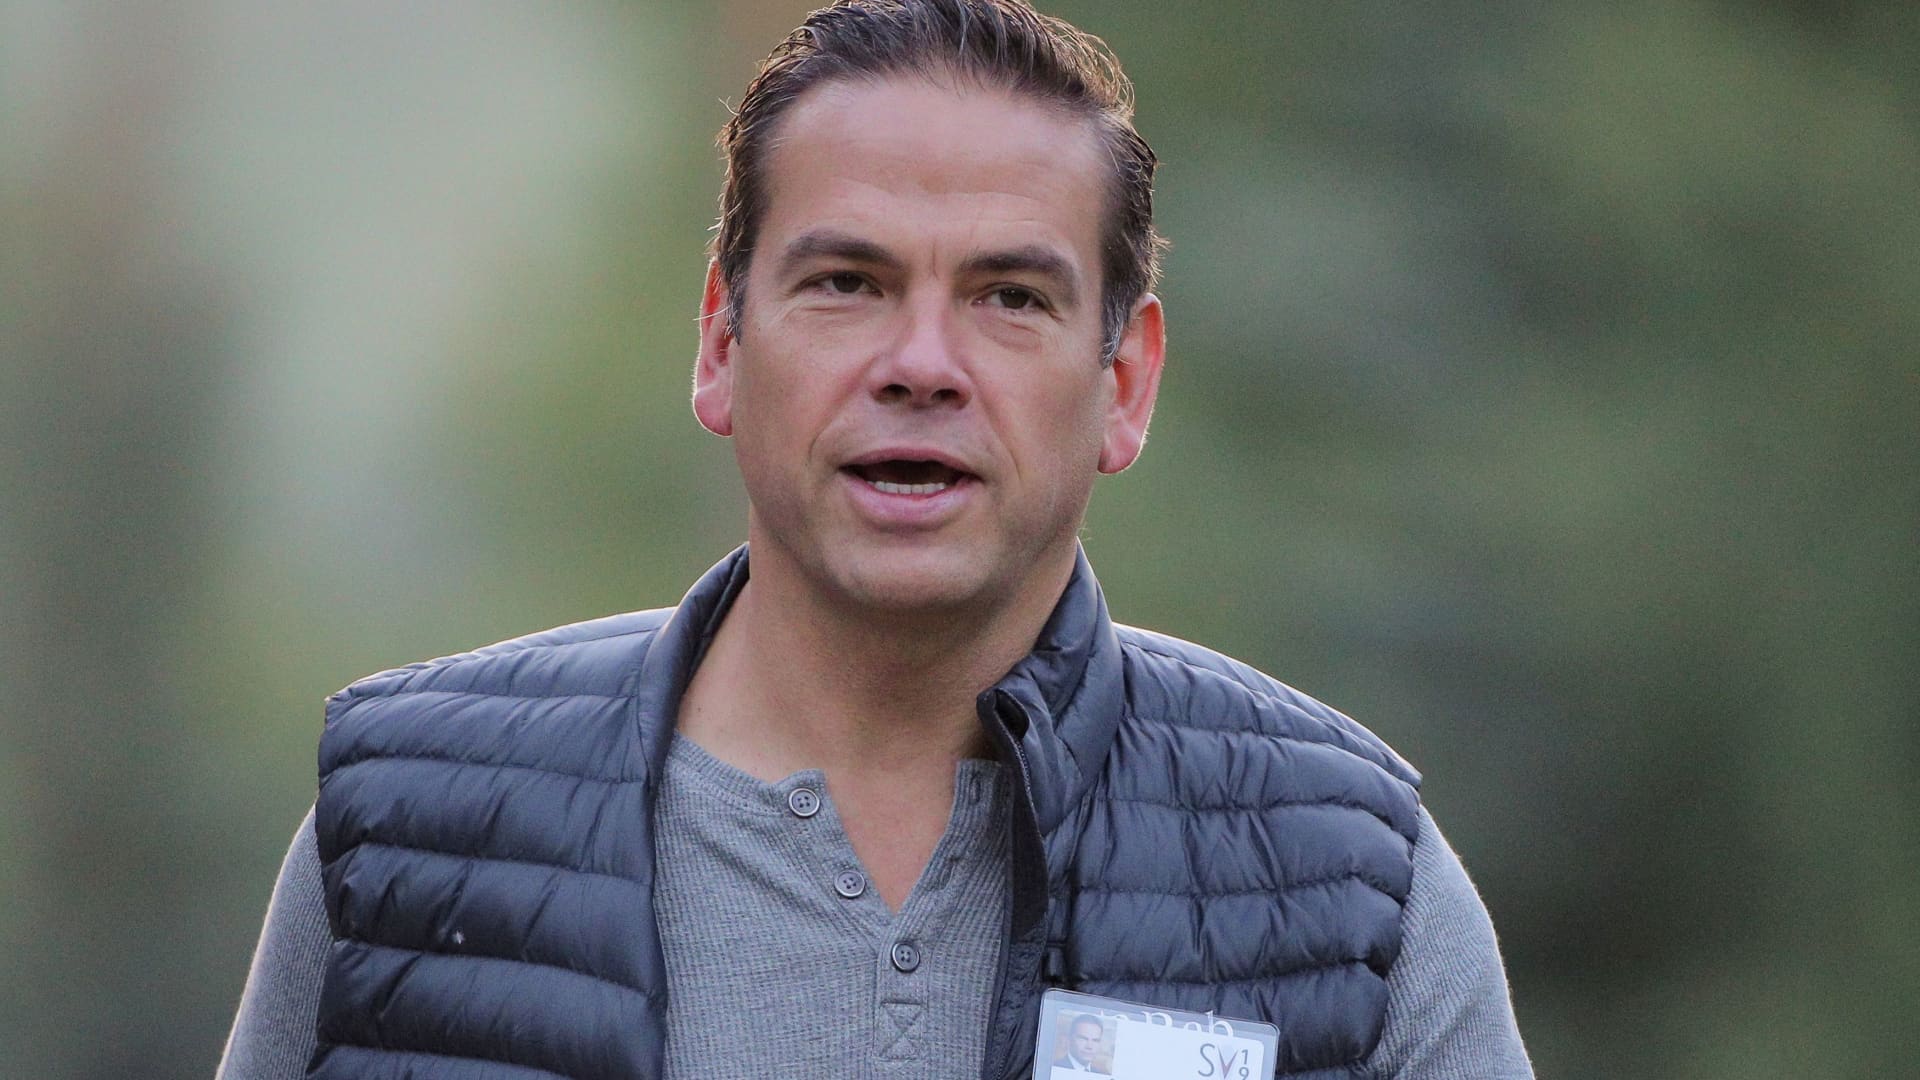 Fox CEO Lachlan Murdoch to face questioning as part of Dominion Voting’s $1.6 billion lawsuit